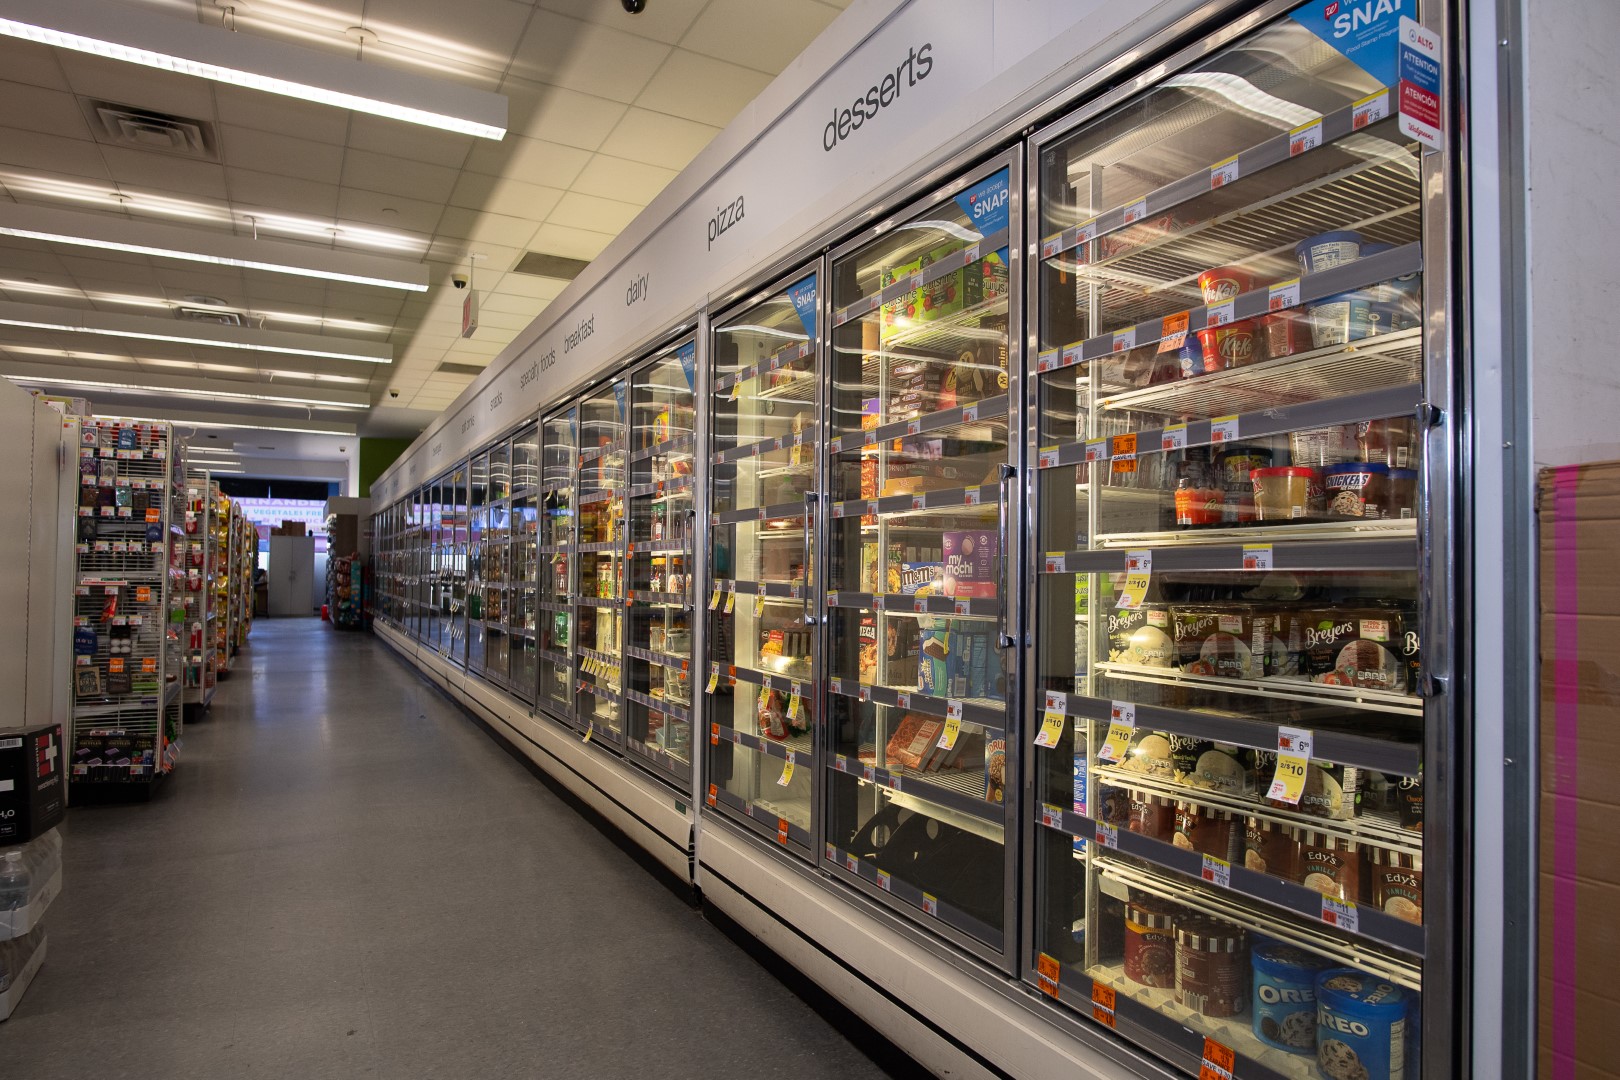 A brightly lit supermarket aisle with a row of refrigerated shelves filled with an assortment of desserts and frozen foods.